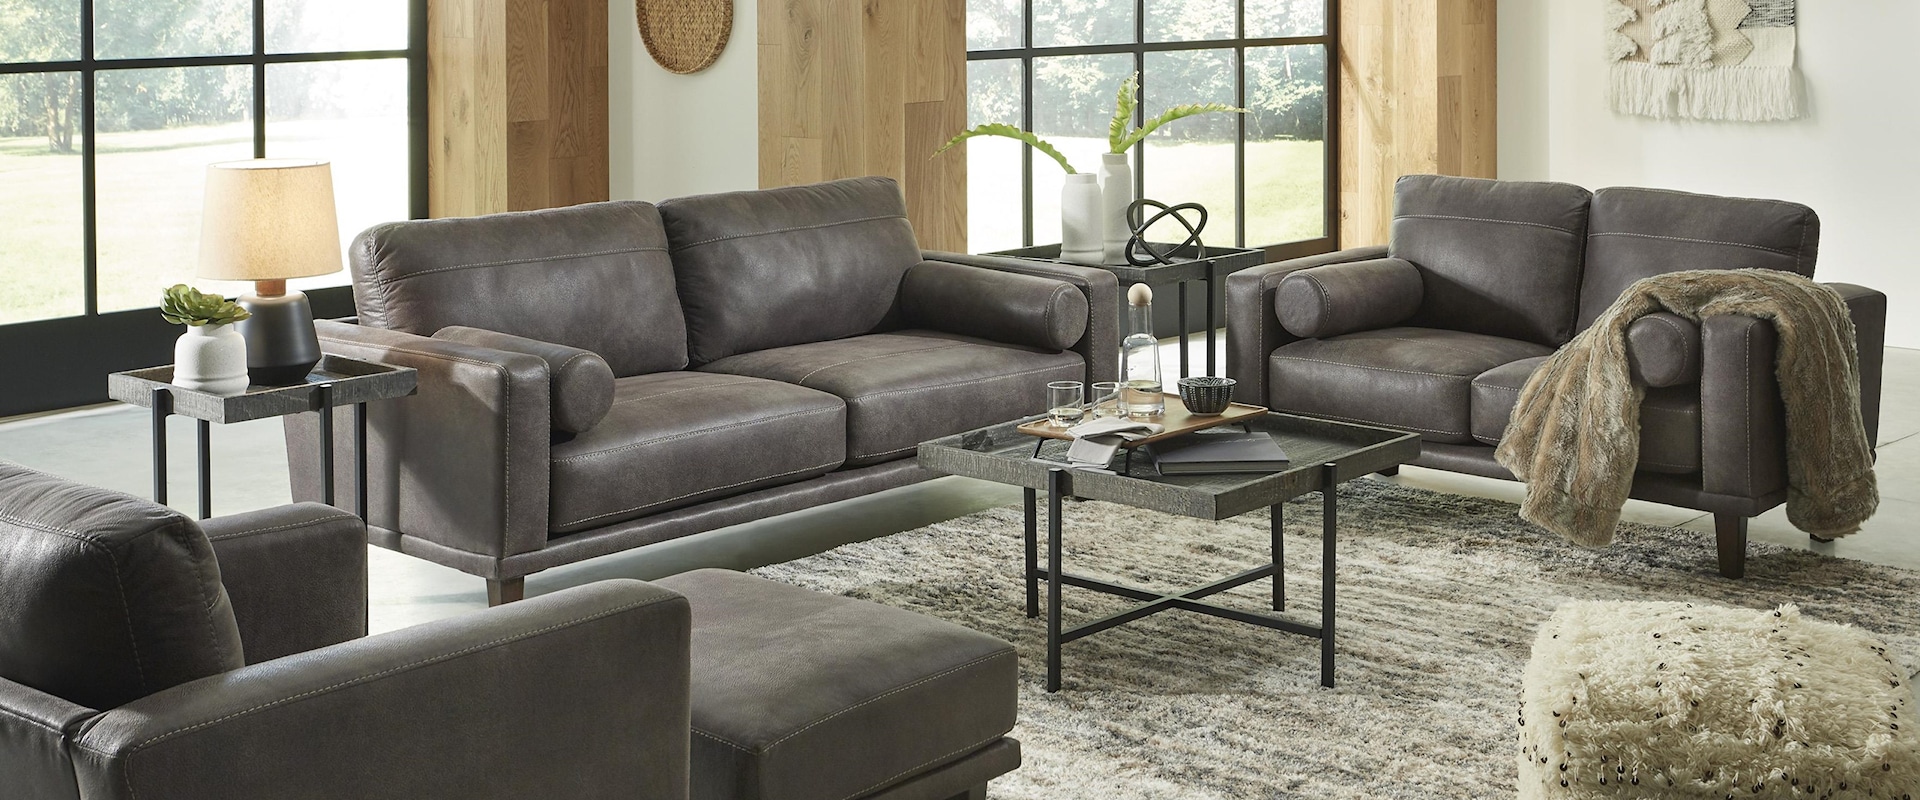 Faux Leather Sofa and Chair Set